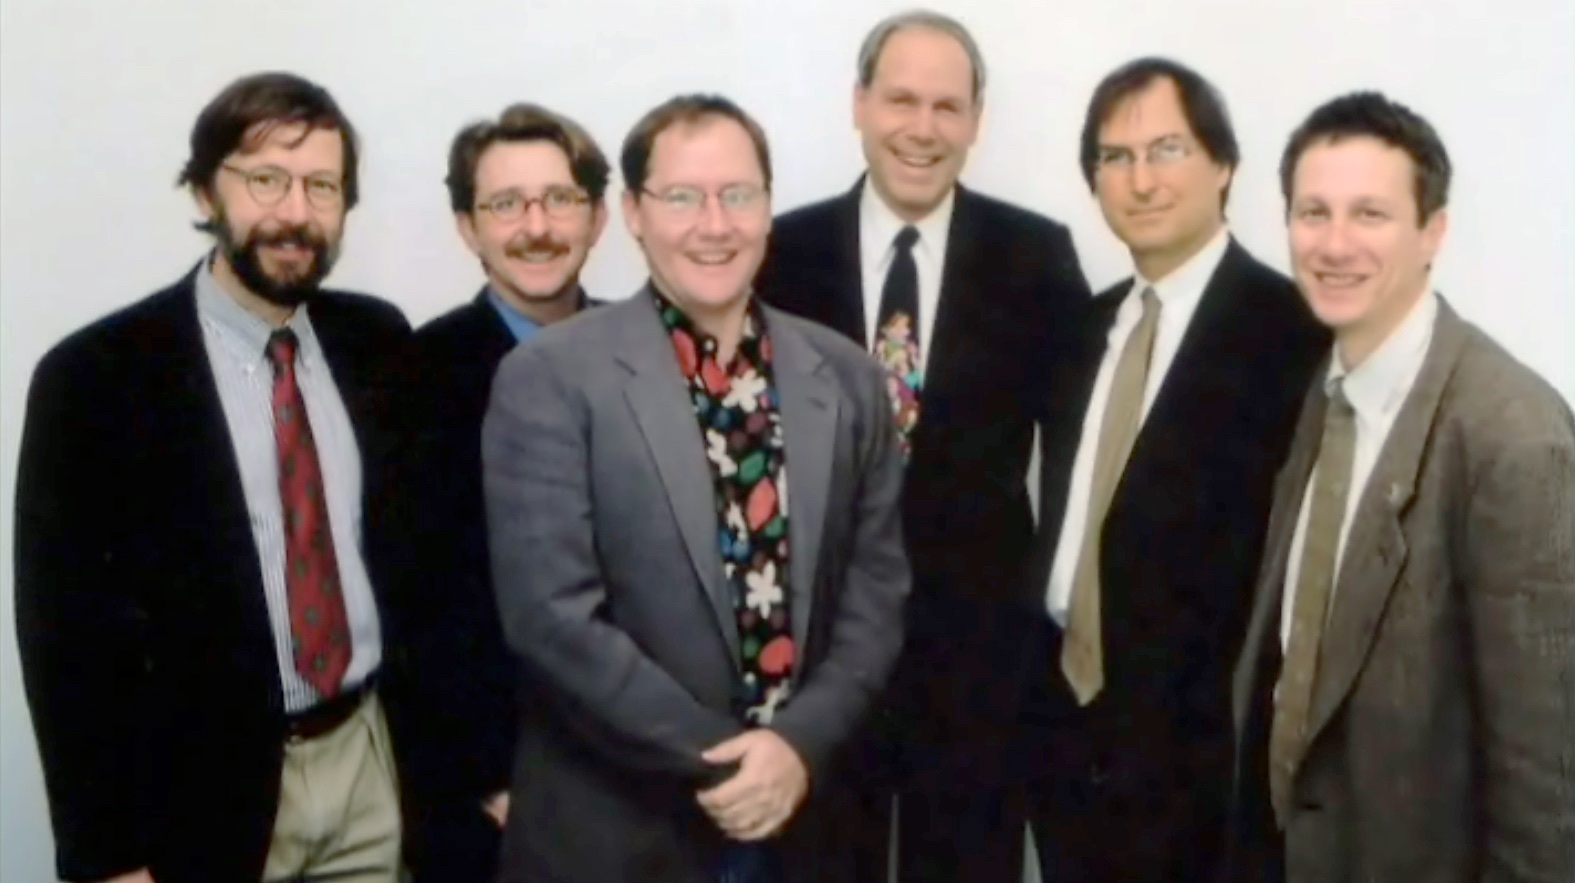 Steve Jobs poses with Disney CEO Michael Eisner (middle, dark suit) and Pixar's Ed Catmull (left-most) and John Lasseter (middle, grey suit), 1995